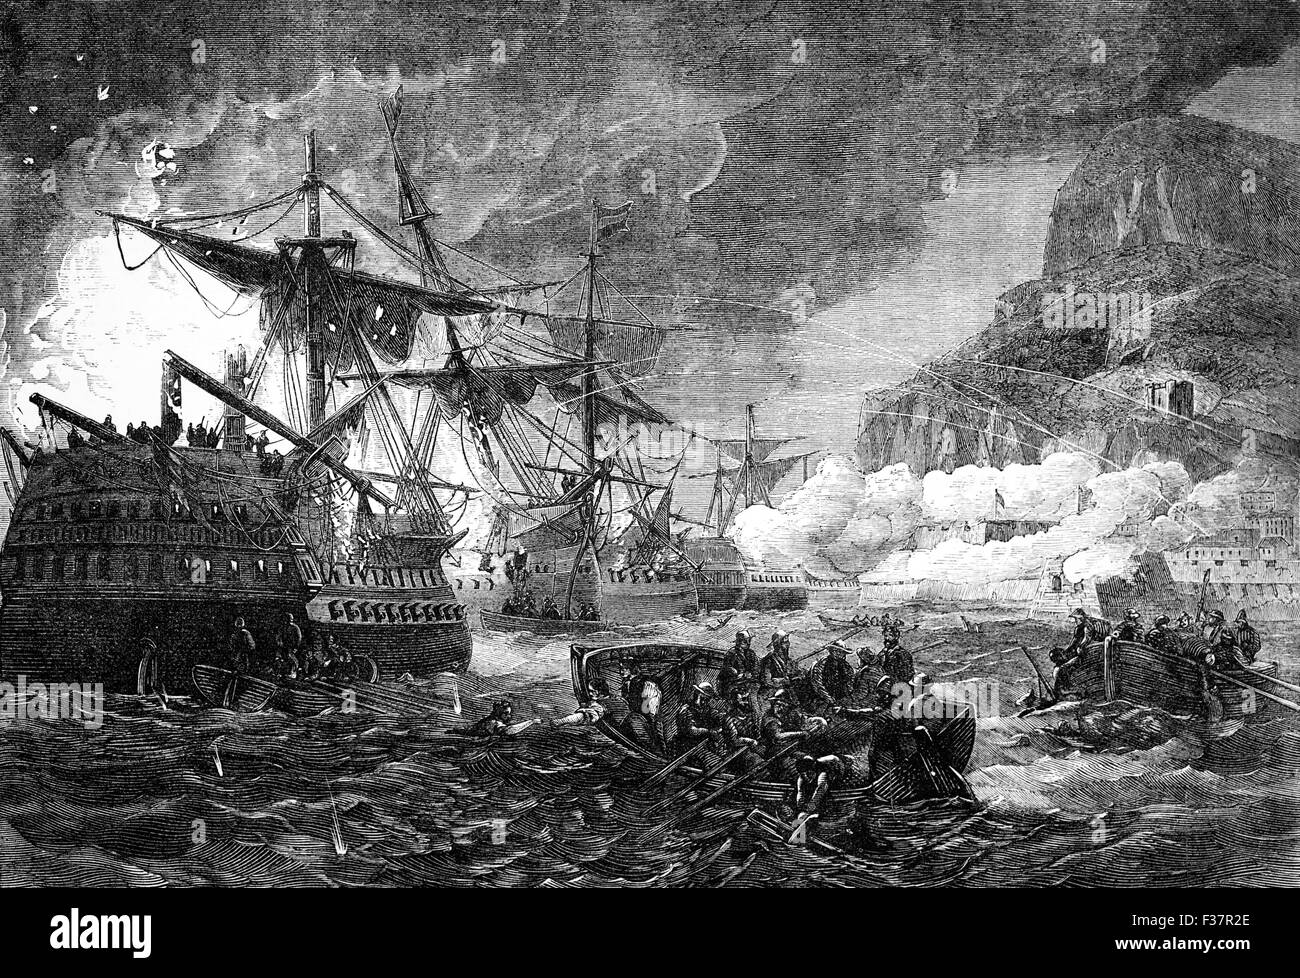 A scene from the Great Siege of Gibraltar, 18 September 1782, an unsuccessful attempt by Spain and France to capture Gibraltar from the British during the American War of Independence. Stock Photo